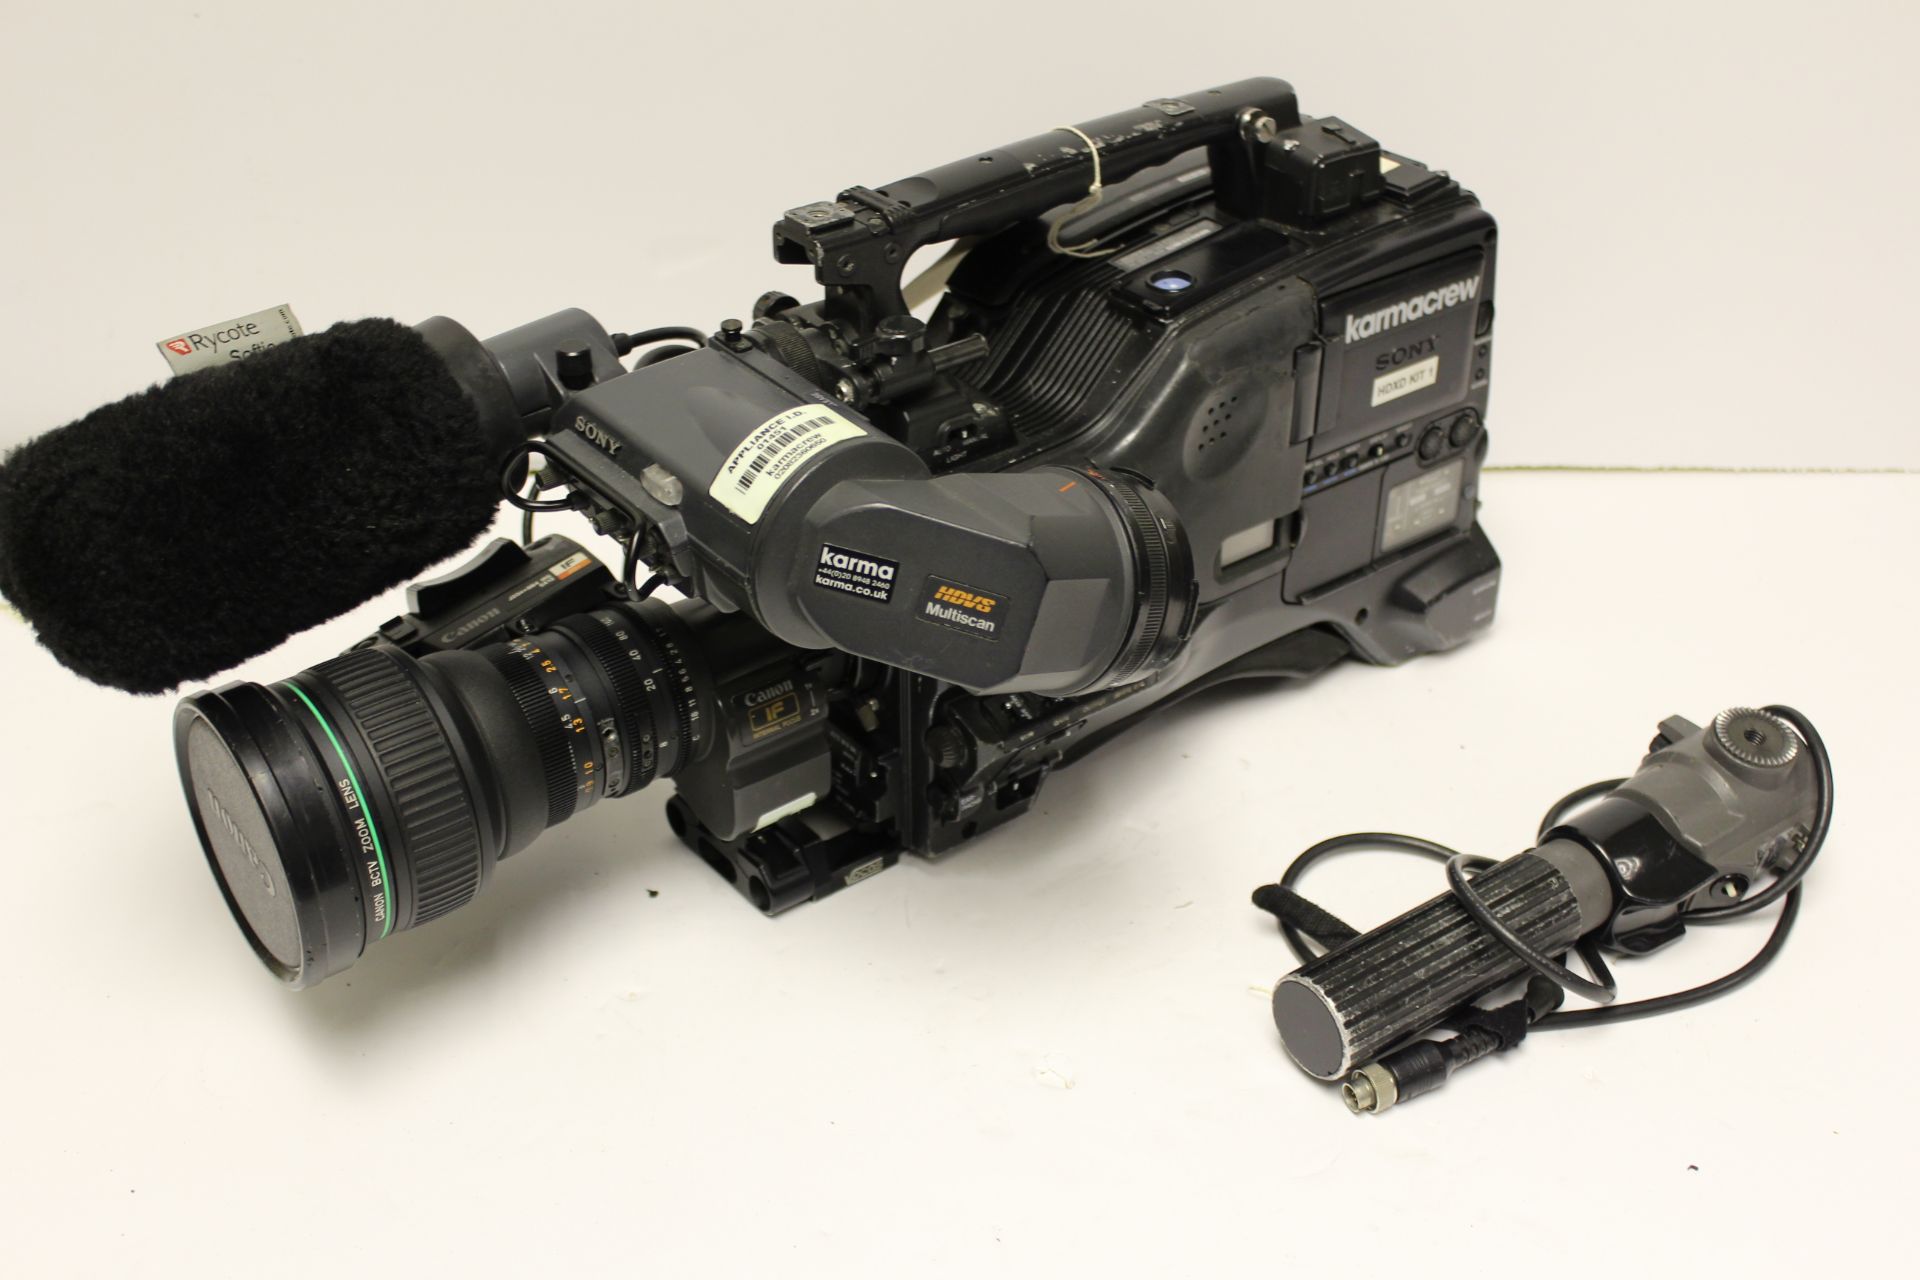 Sony PDW-700 XDCUM HD Professional Disc Camcorder with CAnnon J20 X844 BCTV Zoom Lens, Cannon Zoom D - Image 2 of 2